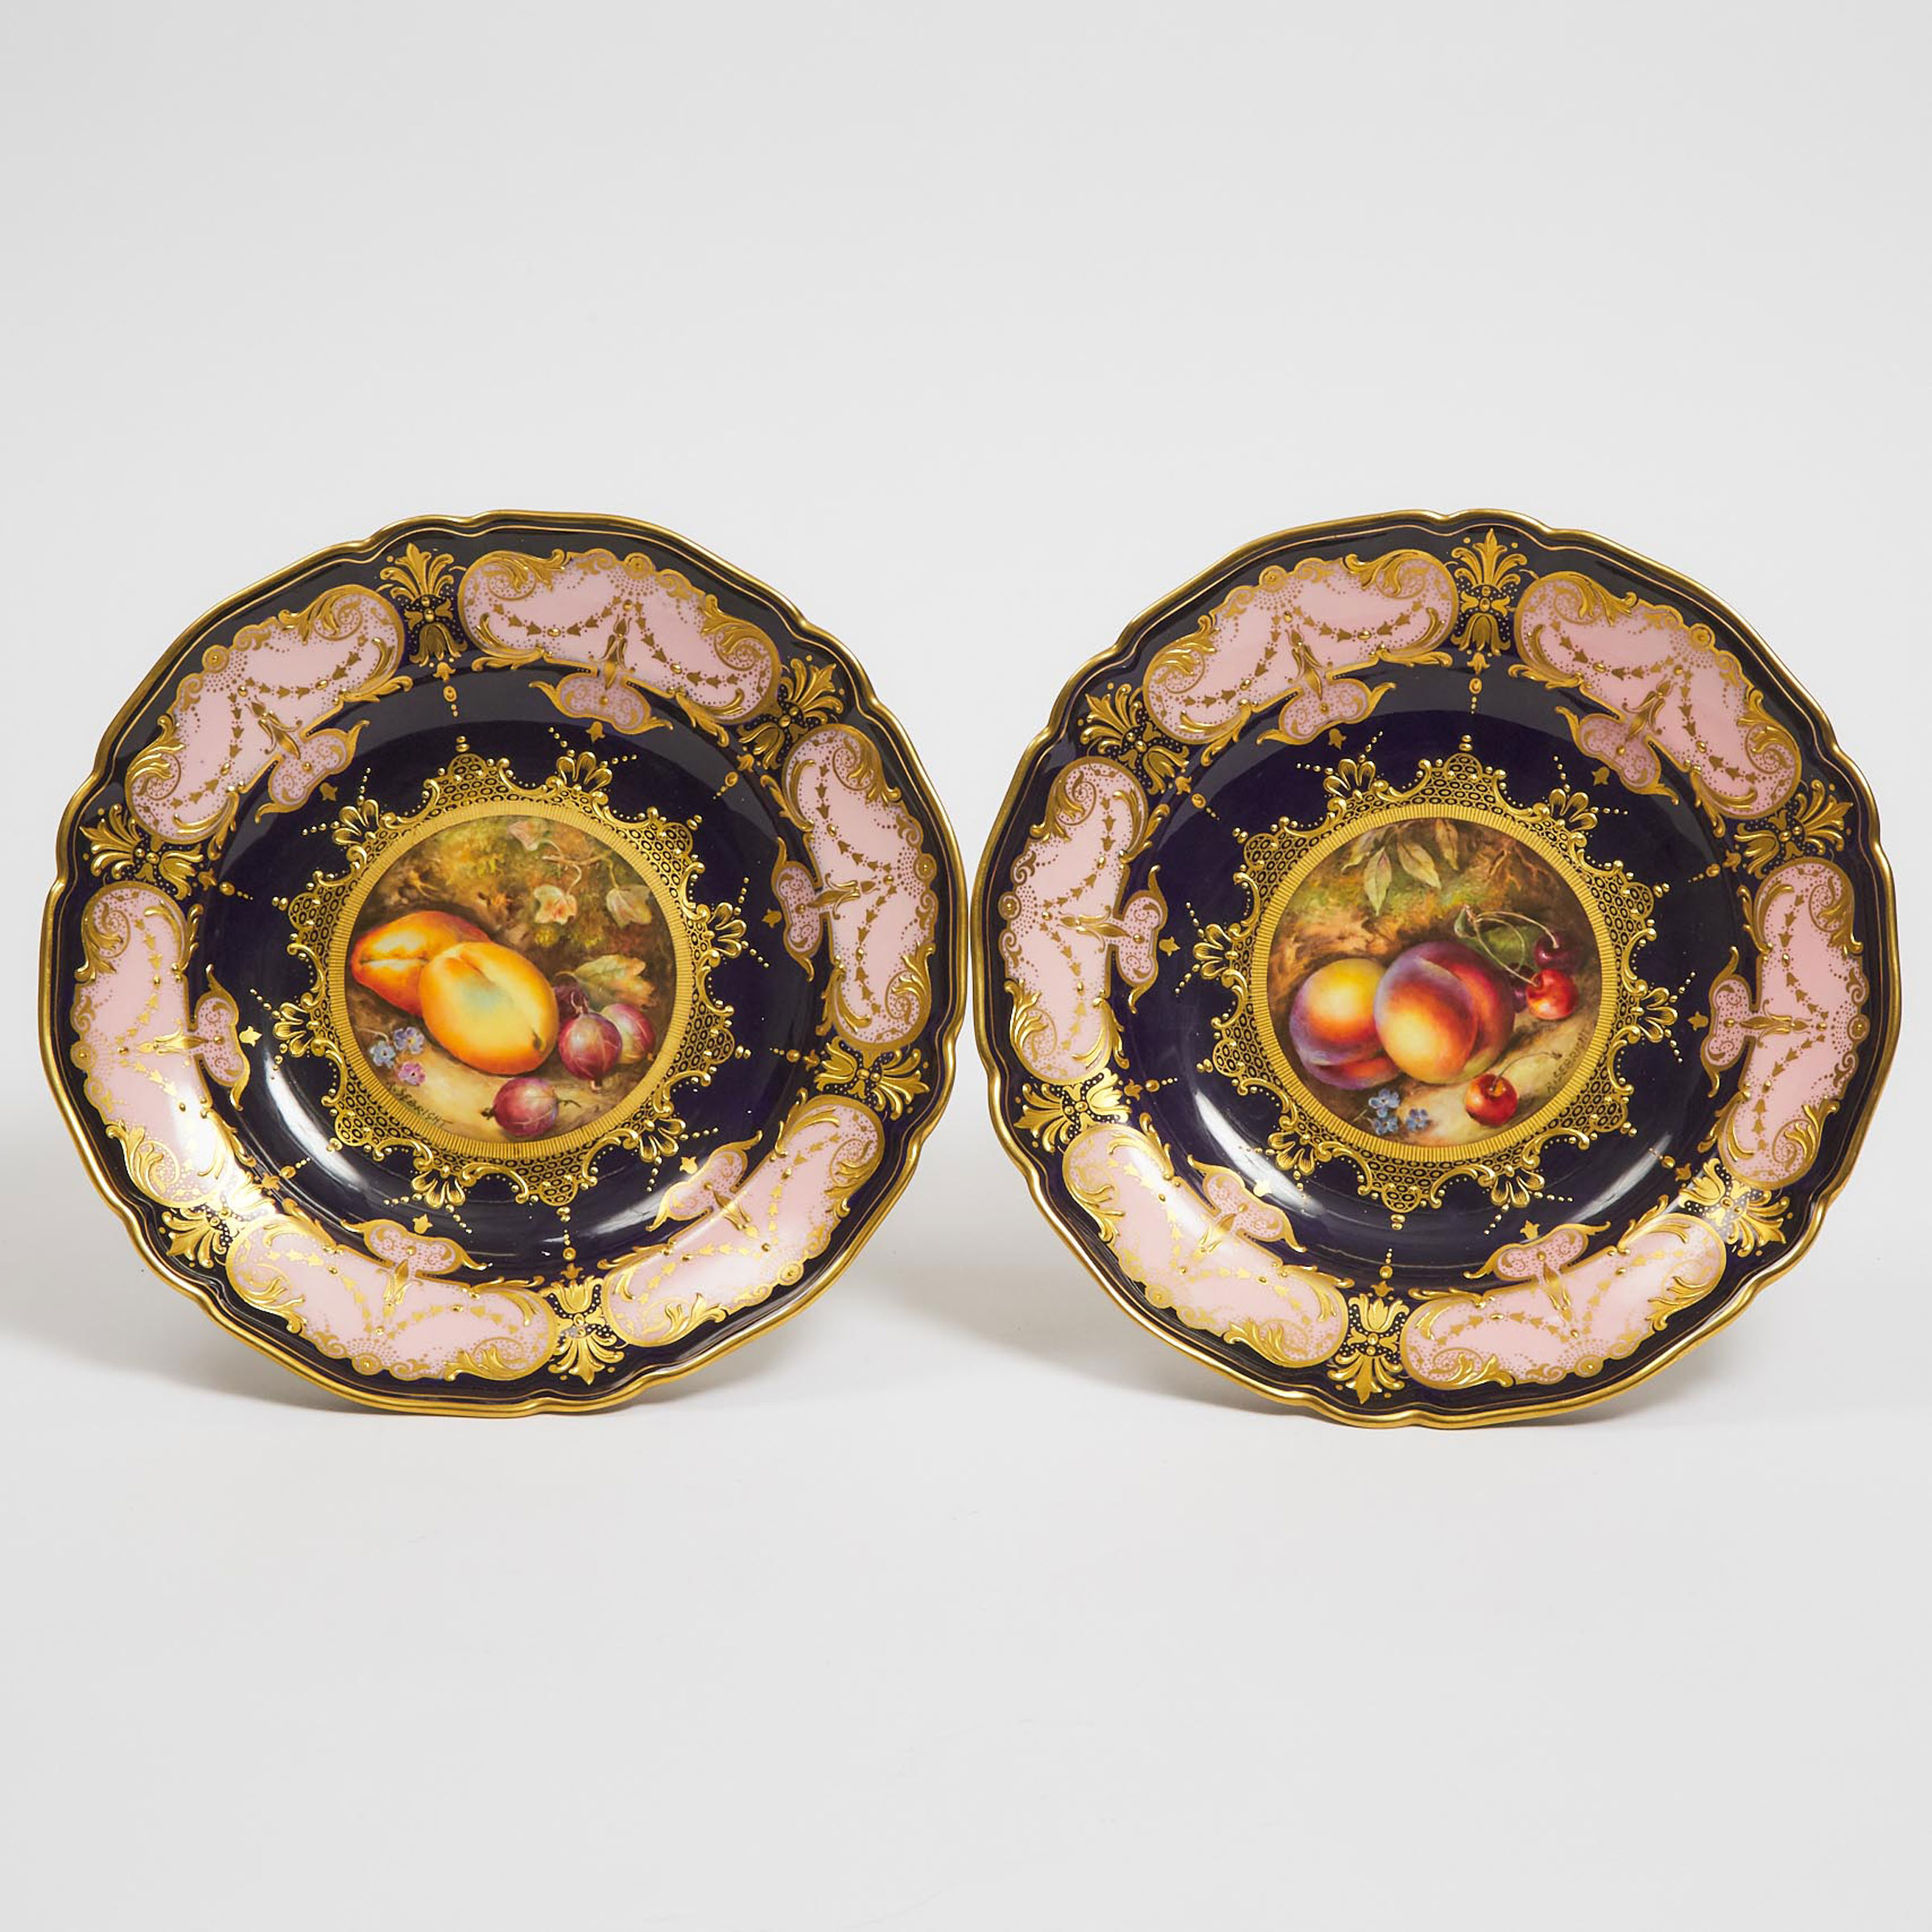 Pair of Royal Worcester Fruit Painted Pedestal-Footed Comports, Richard Sebright, 1928